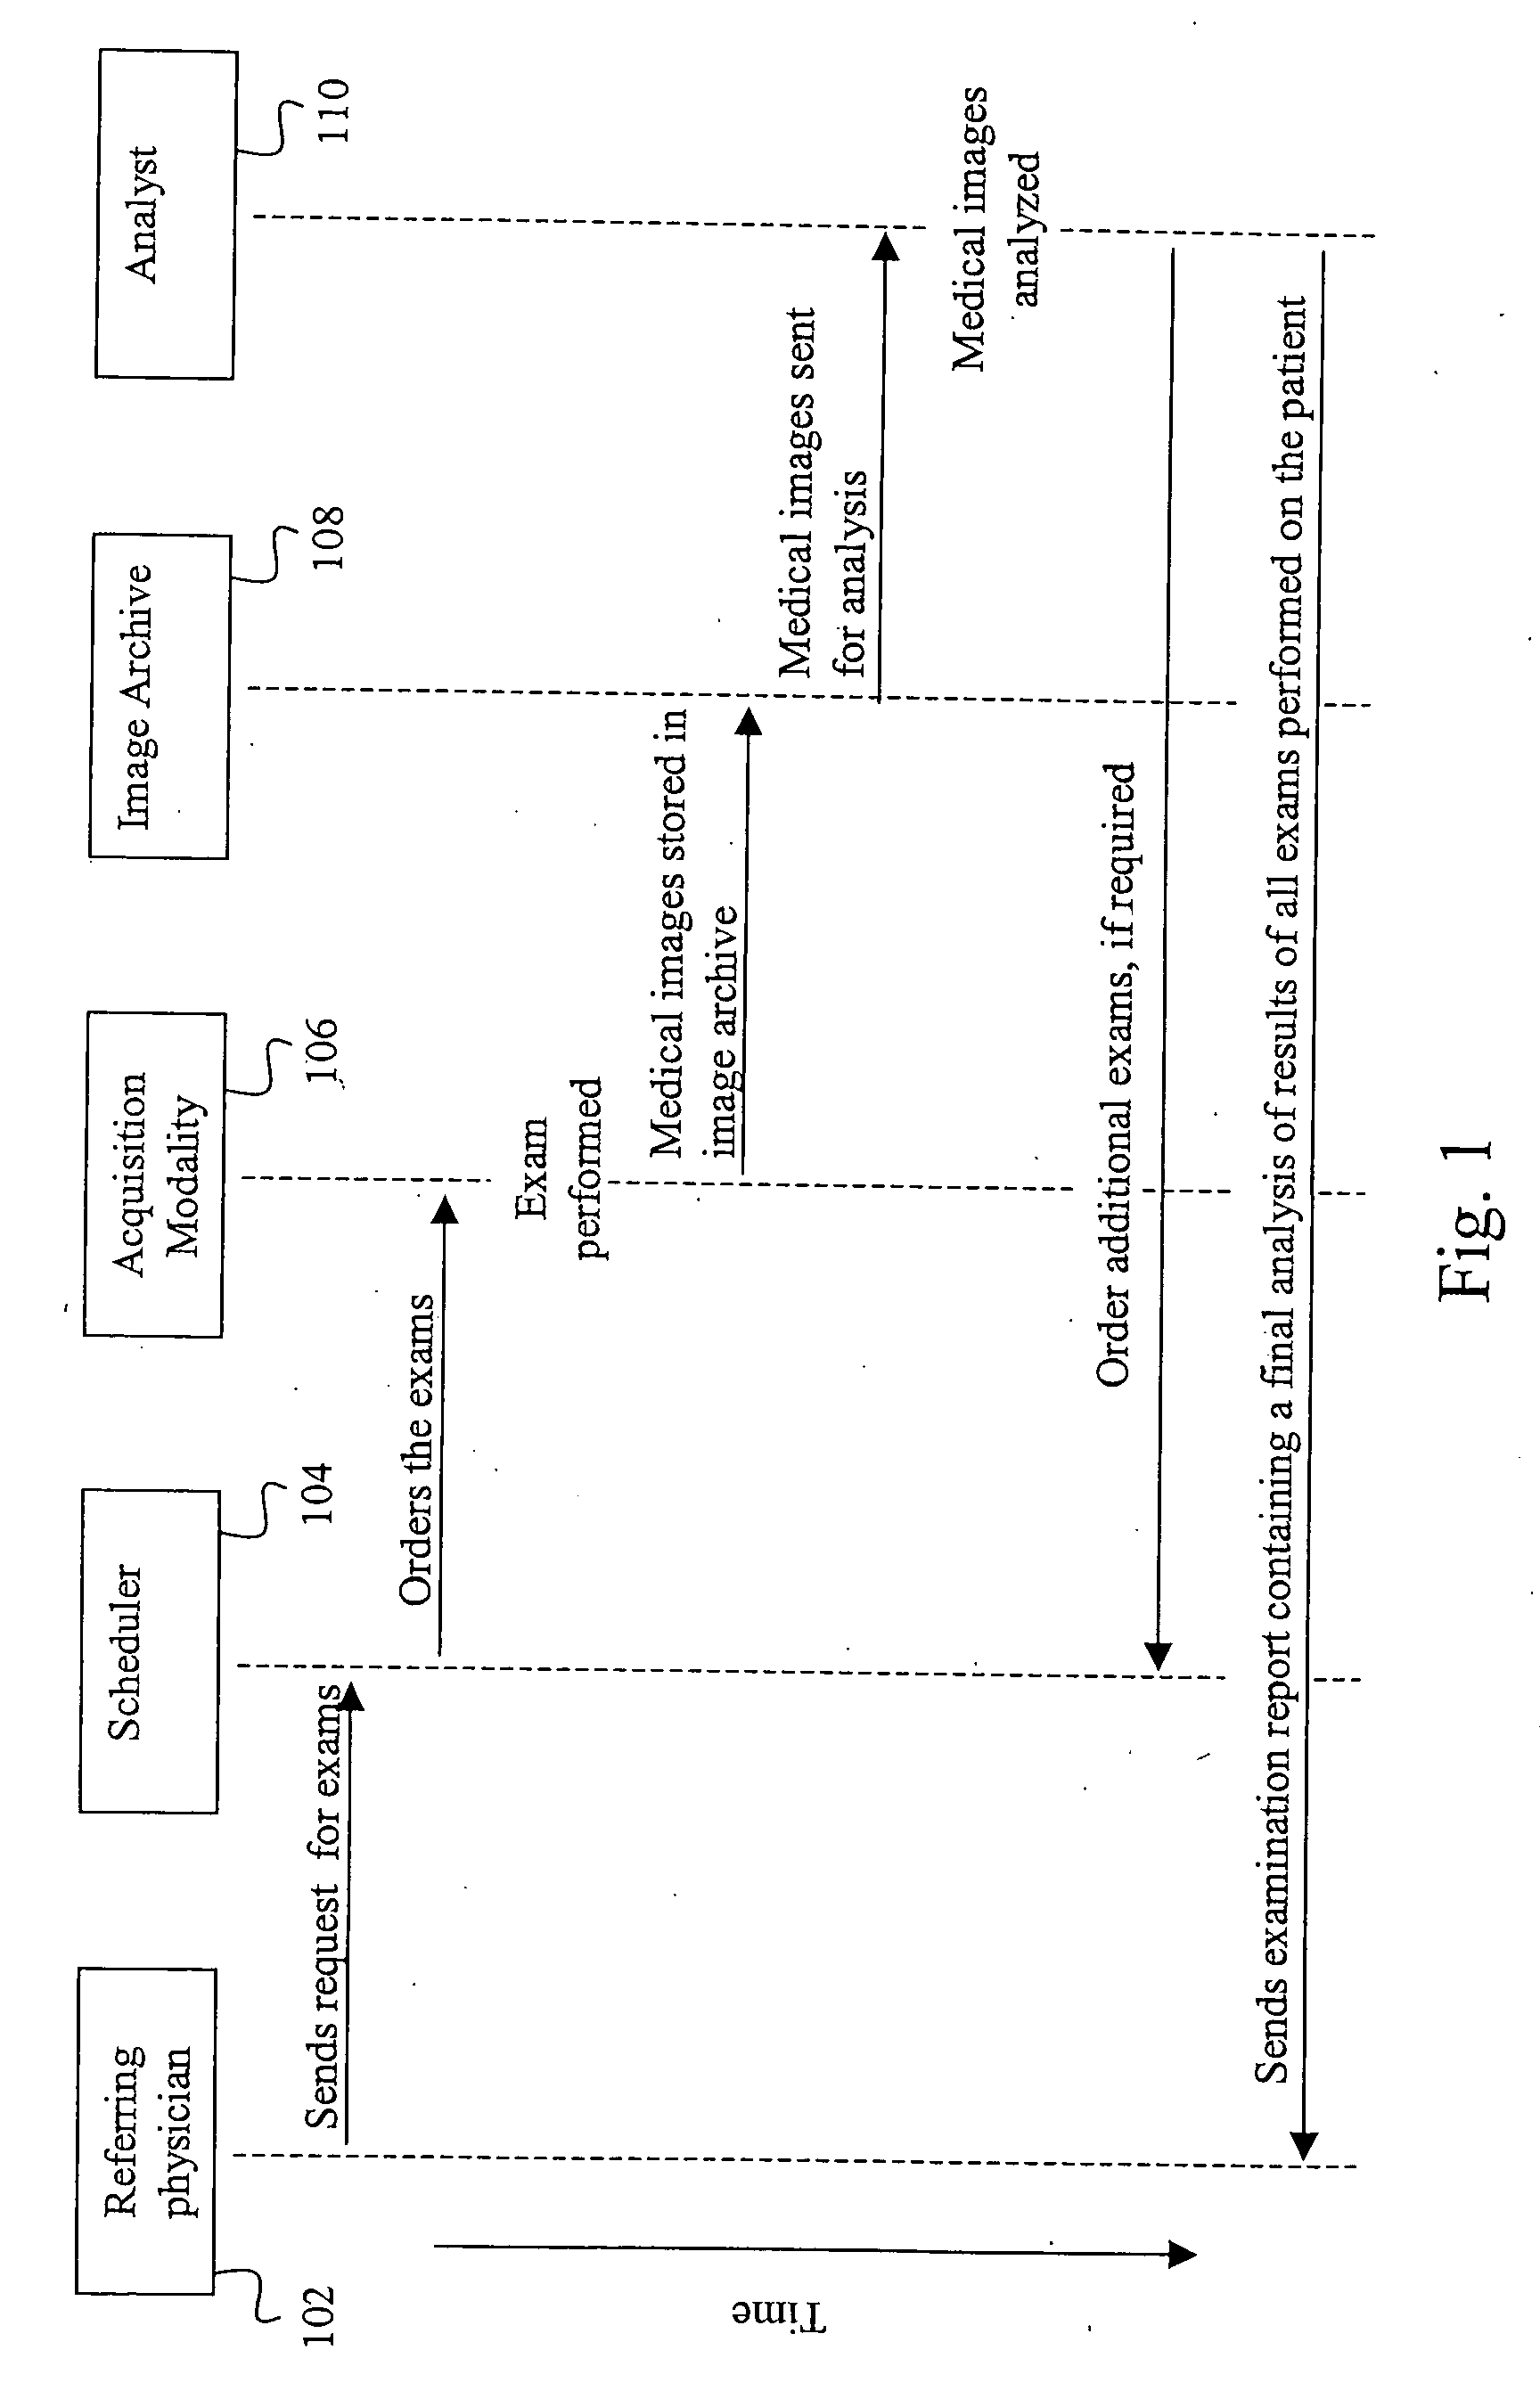 Method for processing a workflow for automated patient scheduling in a hospital information system